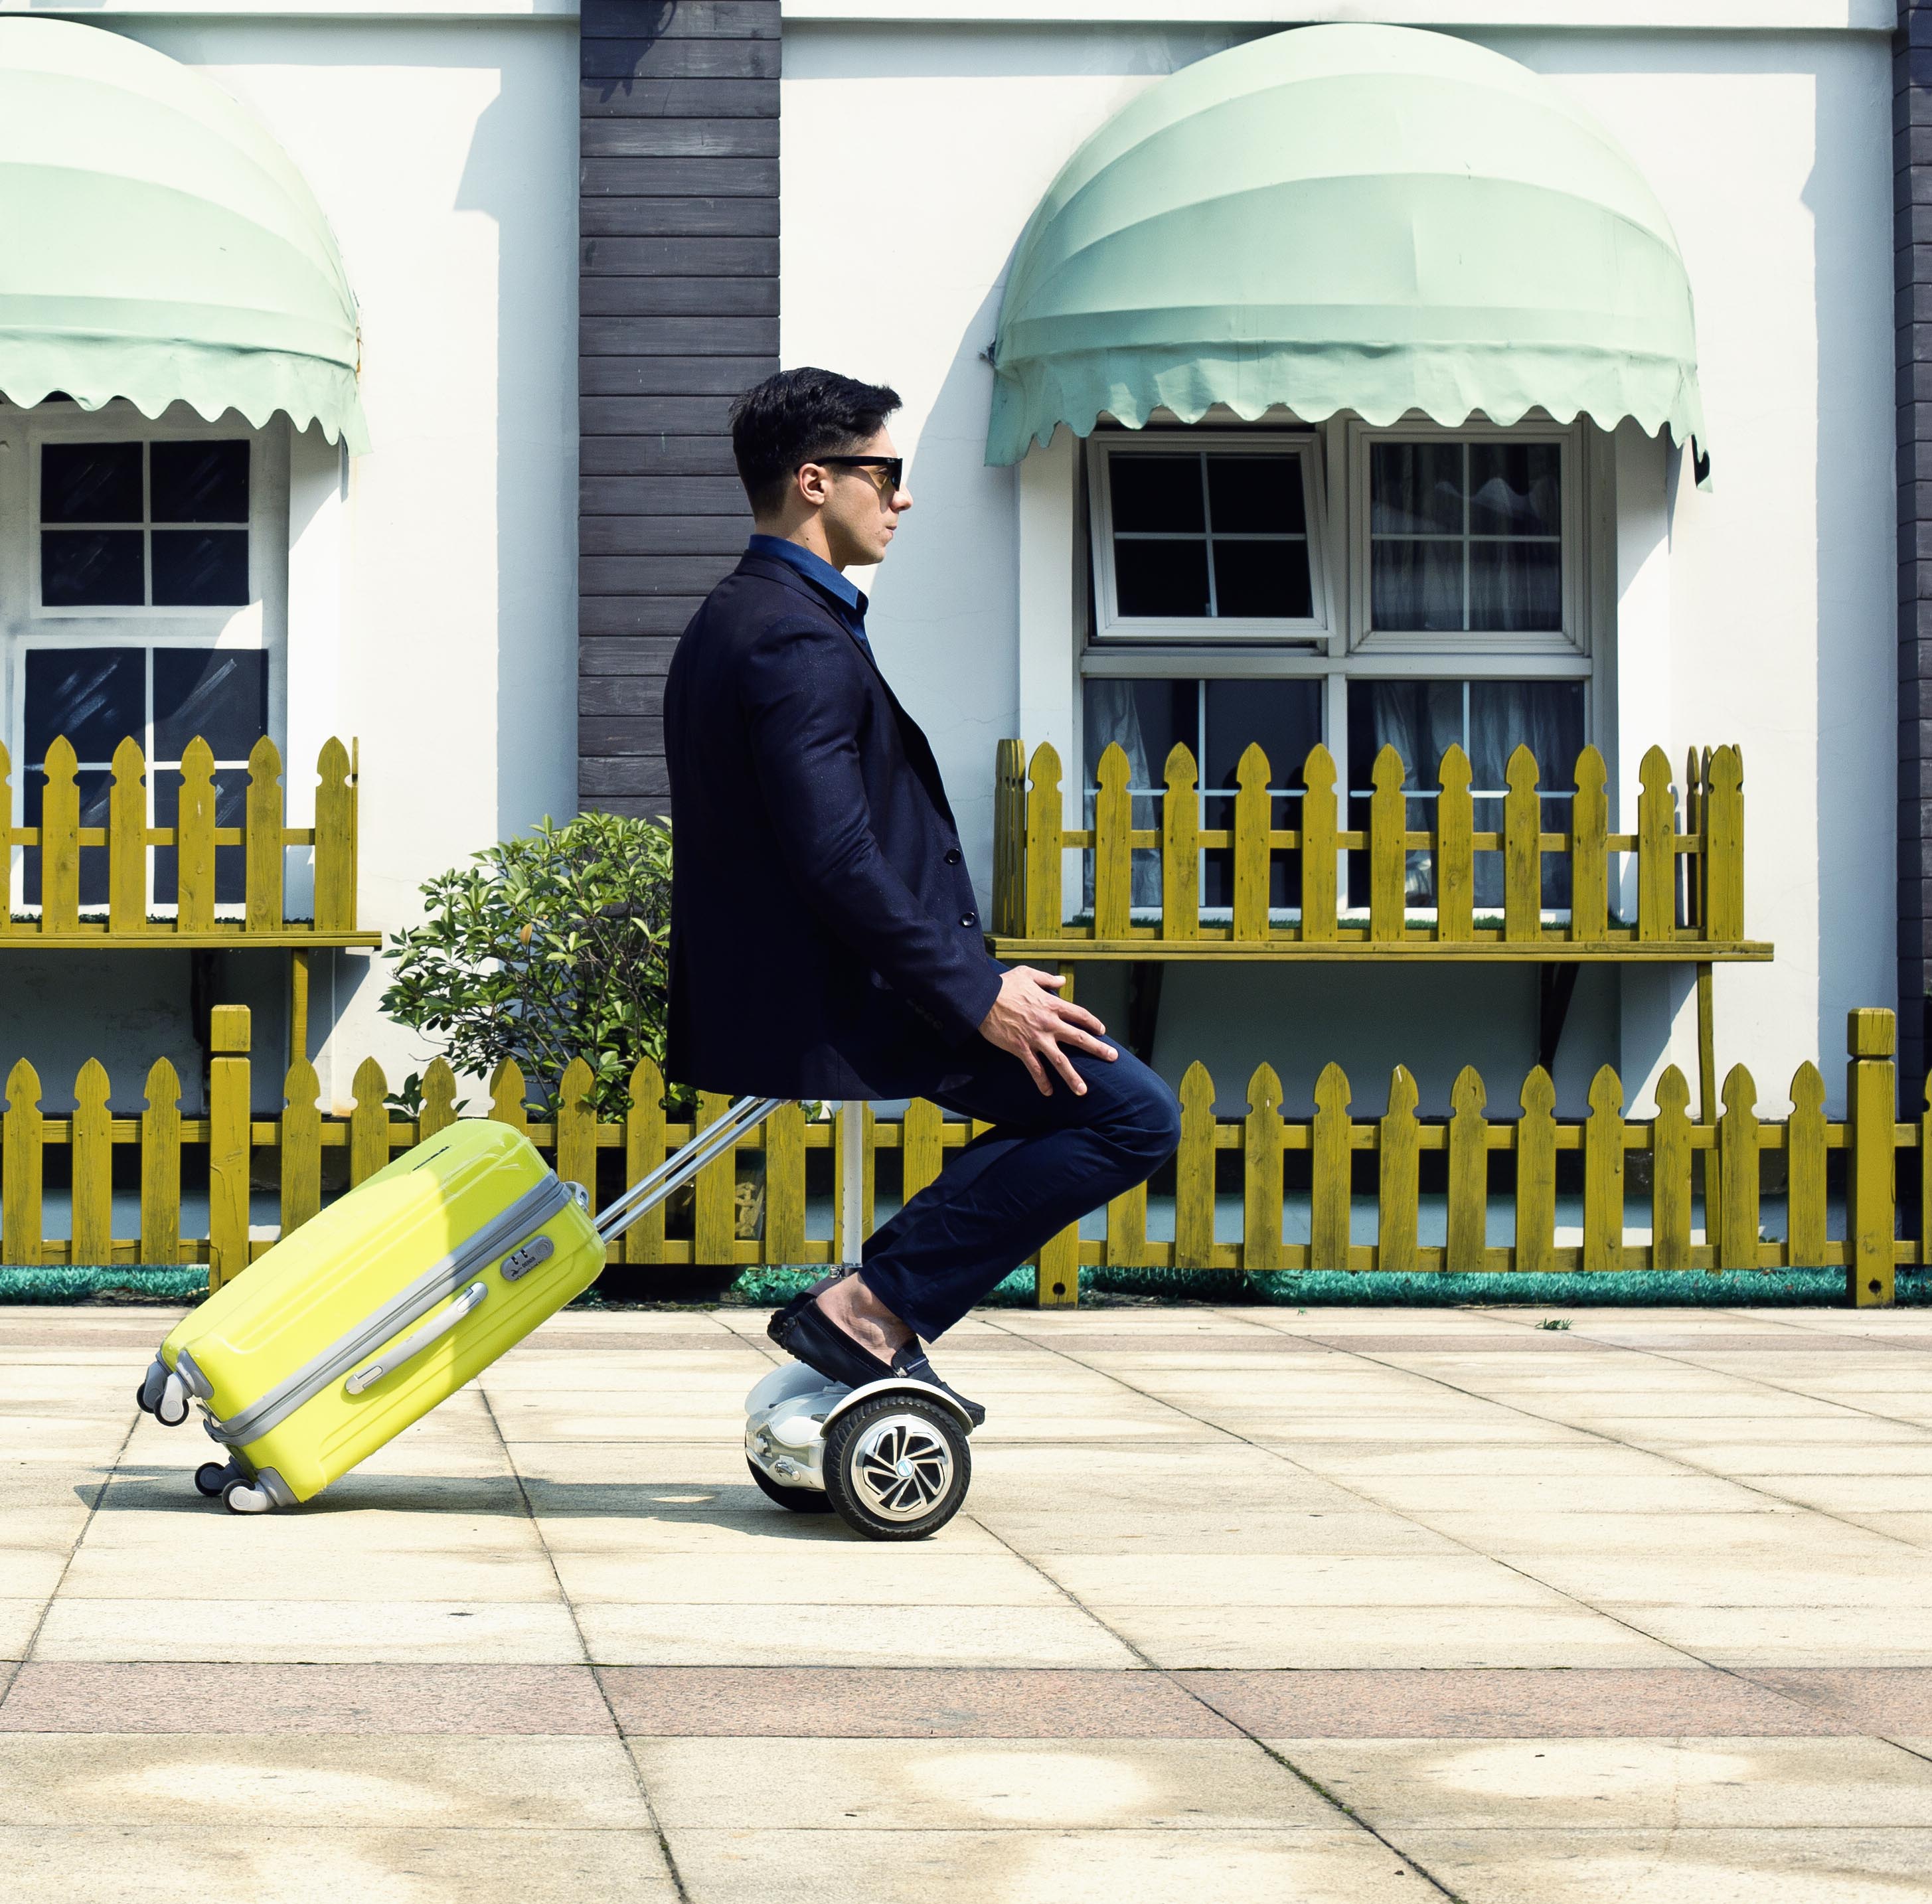 Airwheel S6 saddle-equipped electric scooter